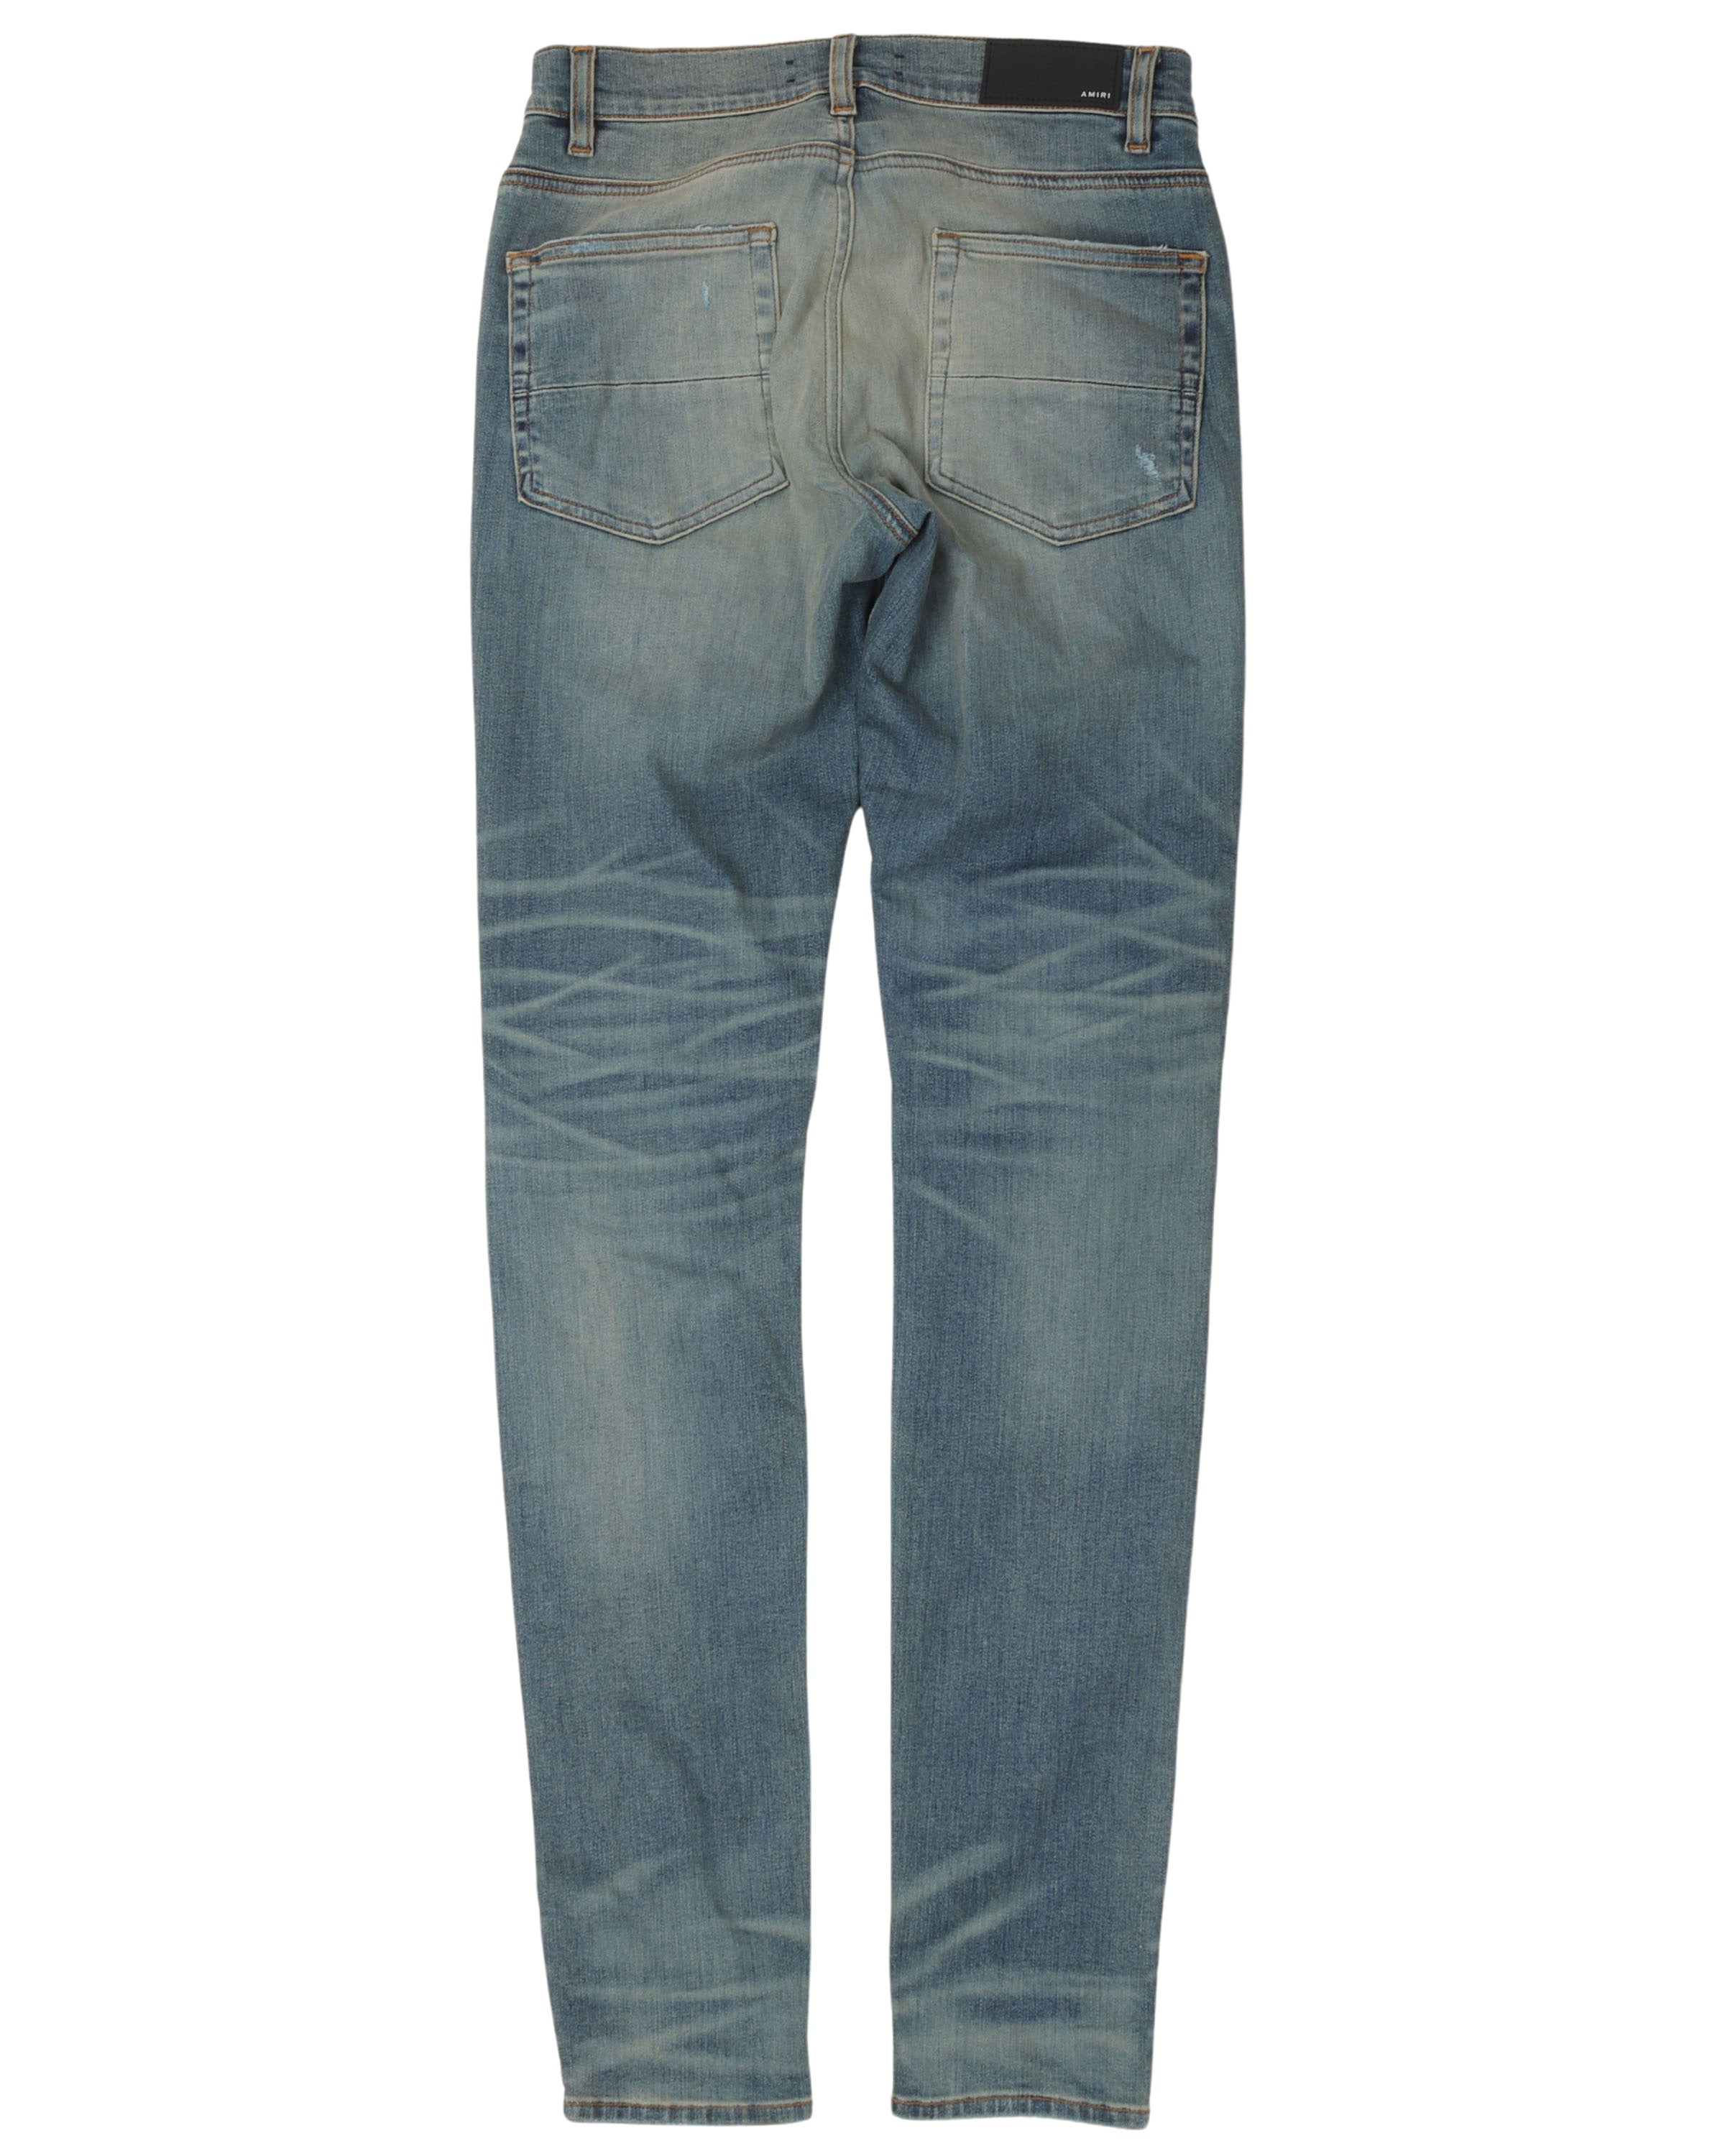 Knee Rip Sand Fade Jeans